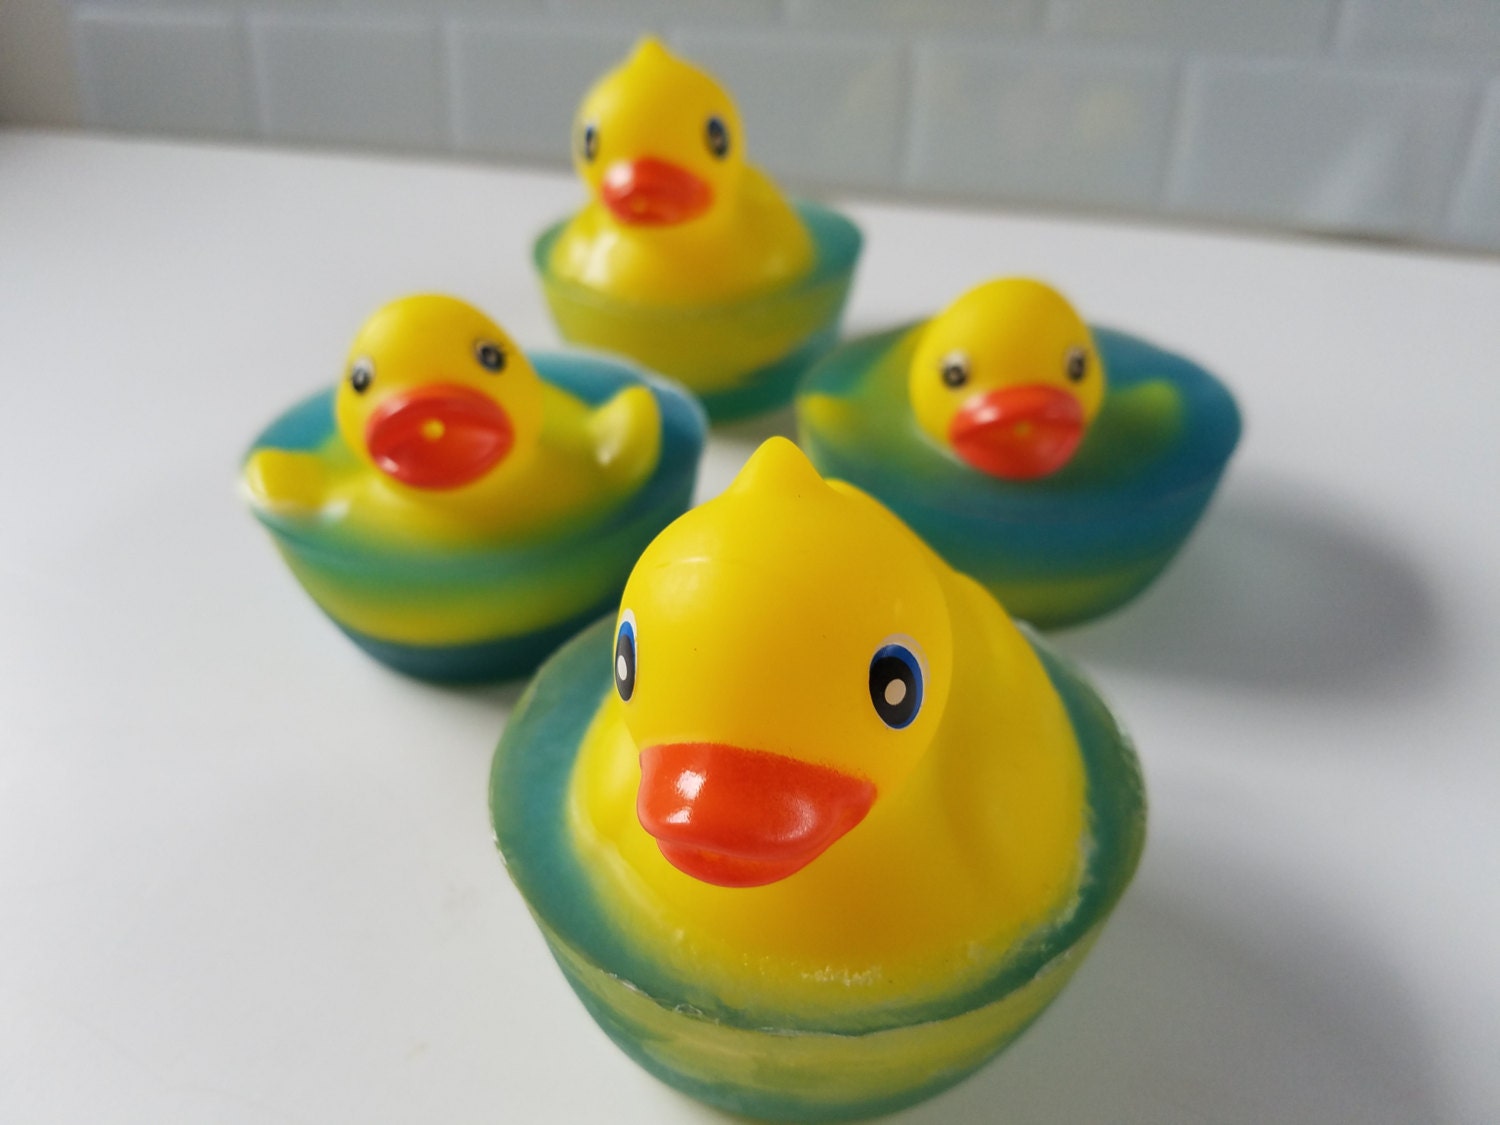 Popular Right Now Rubber Duck Soap Bar Stocking Stuffers For Kids